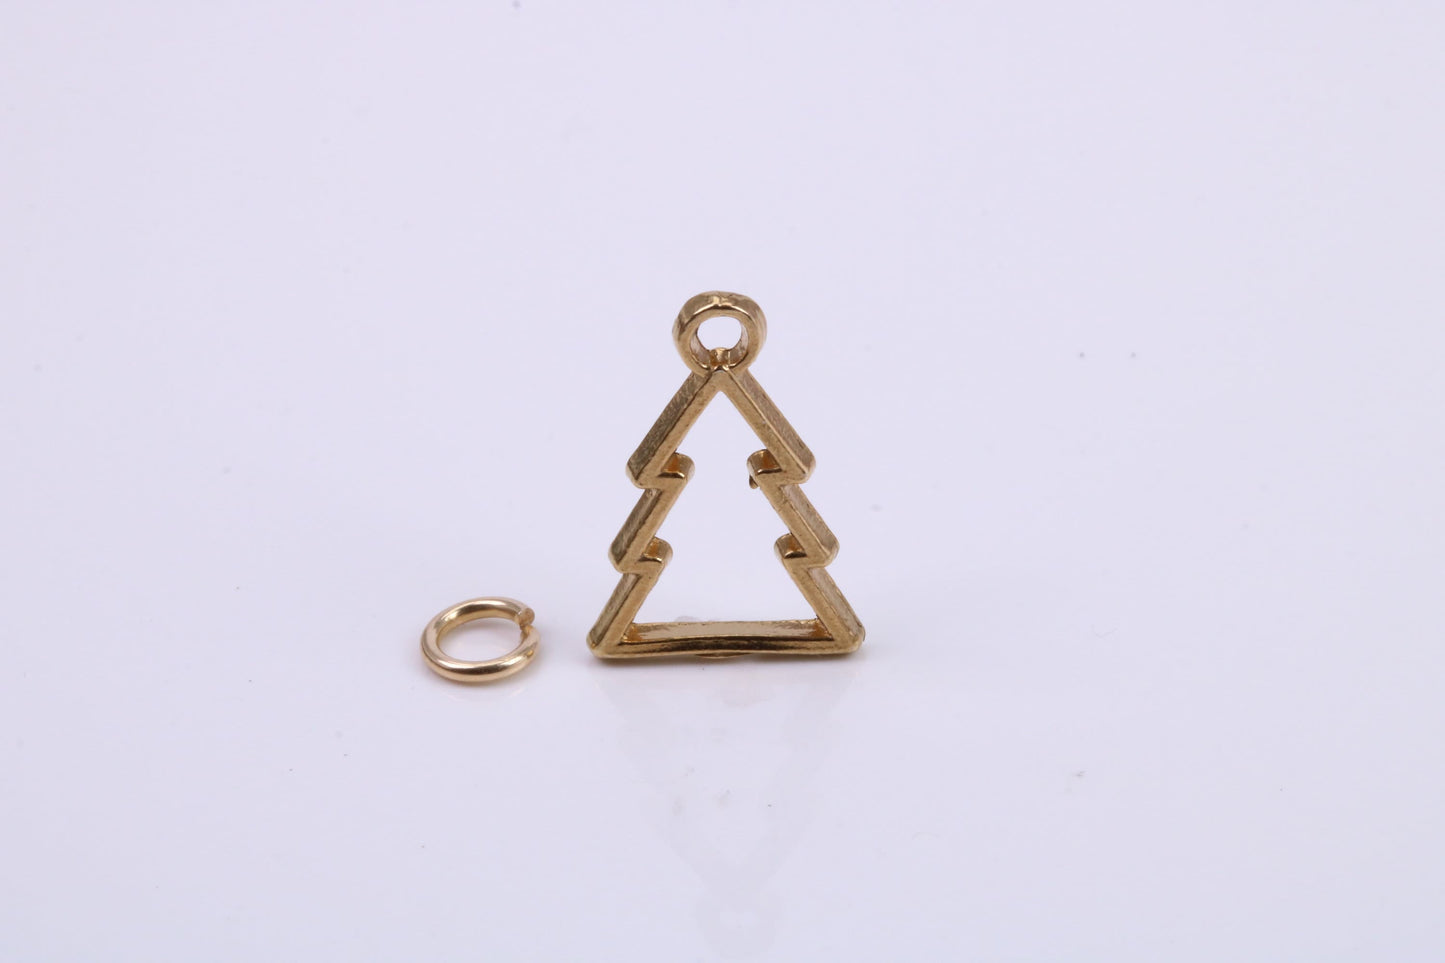 Christmas Tree Charm, Traditional Charm, Made from Solid 9ct Yellow Gold, British Hallmarked, Complete with Attachment Link